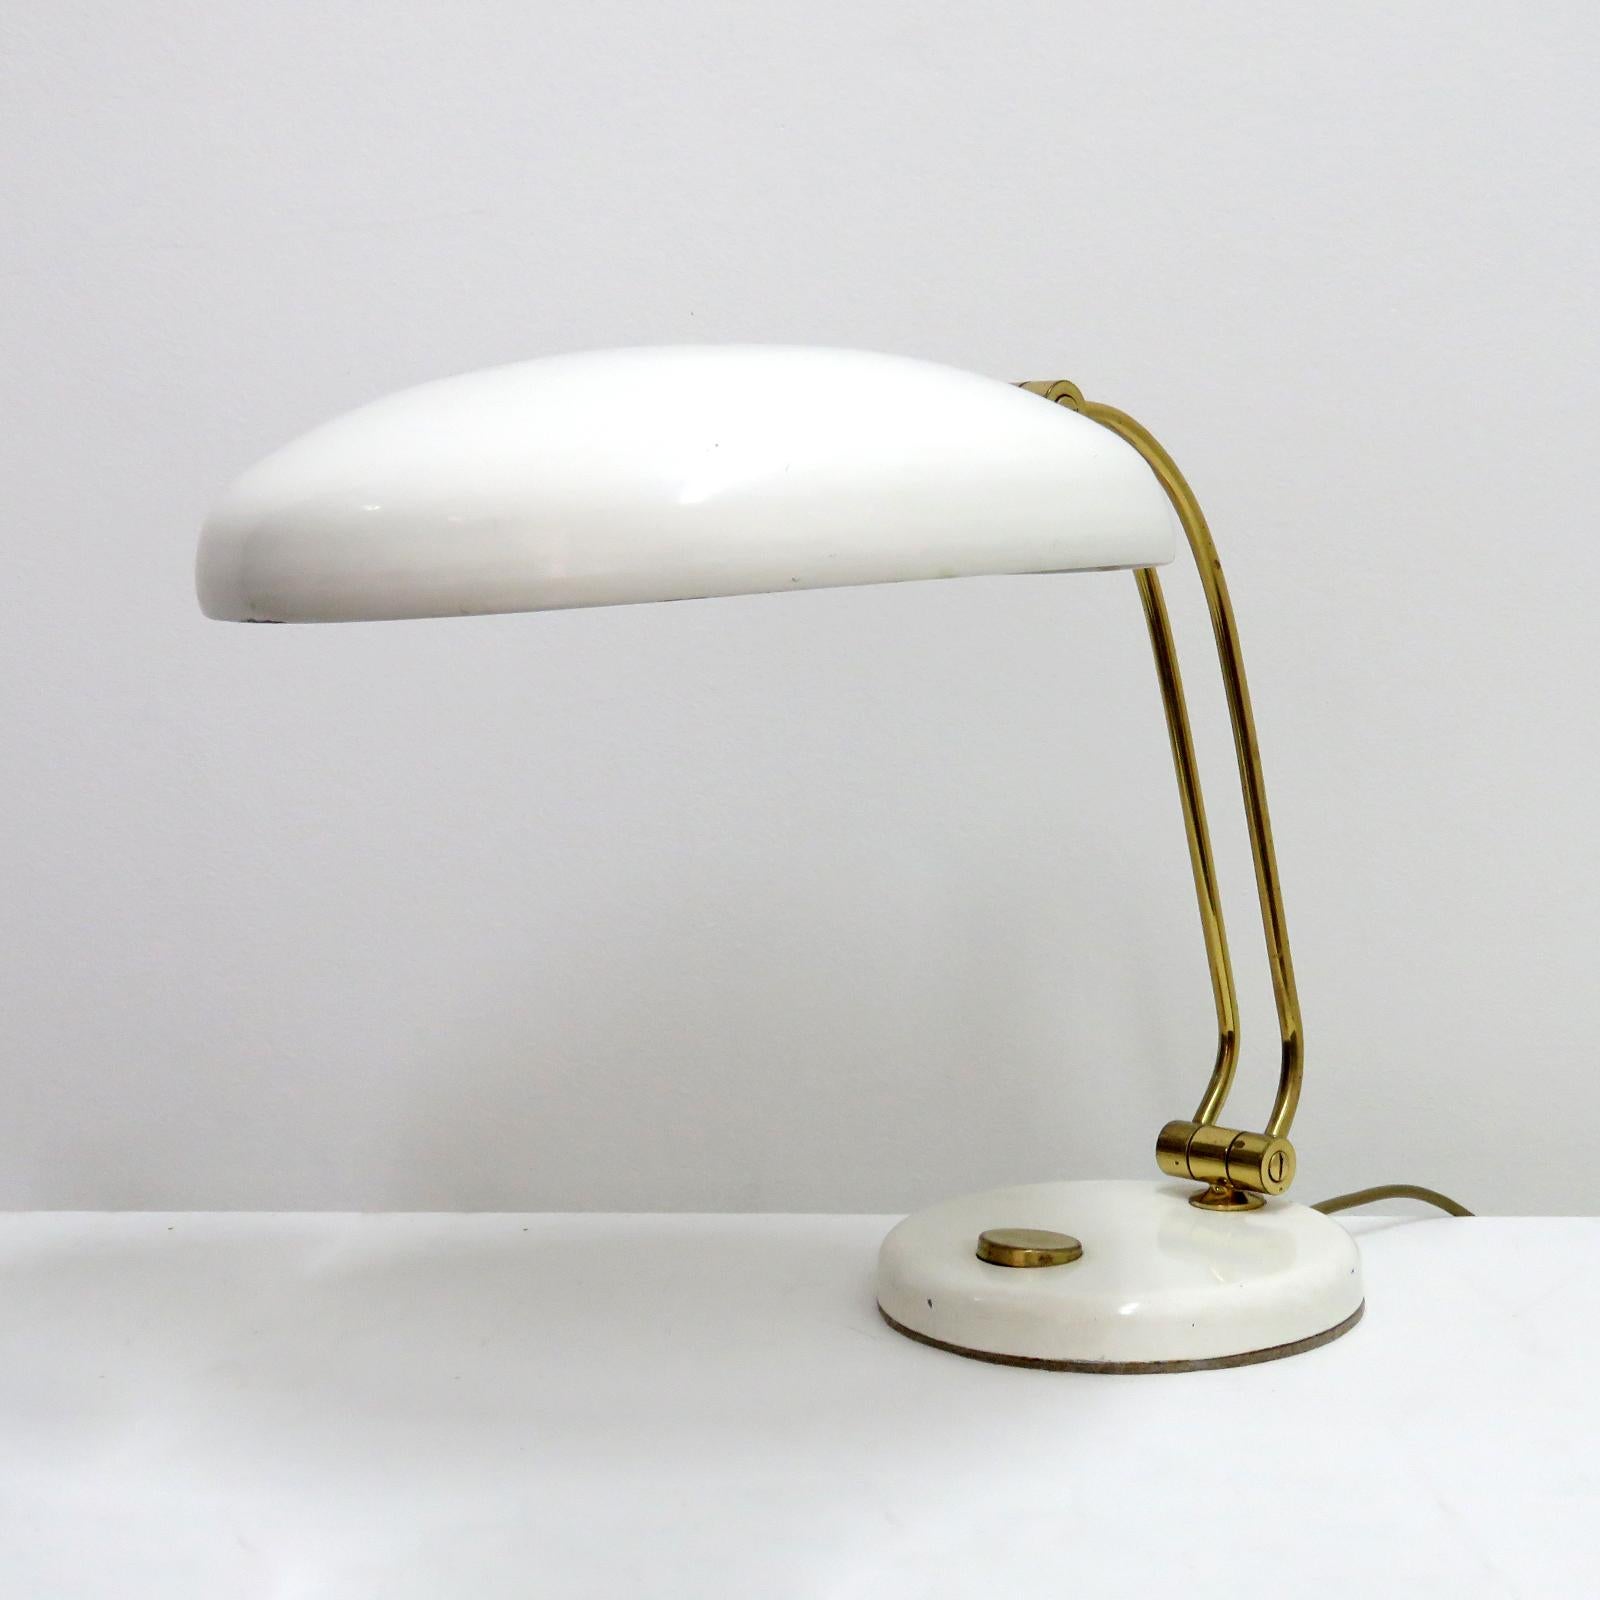 Wonderful table lamp by Hillebrand, 1960, in white and brass, on/off switch at the base, shade and arm are adjustable, wired for the US standards, one E26 socket, max. wattage 75w or LED equivalent, bulb provided as a onetime courtesy.